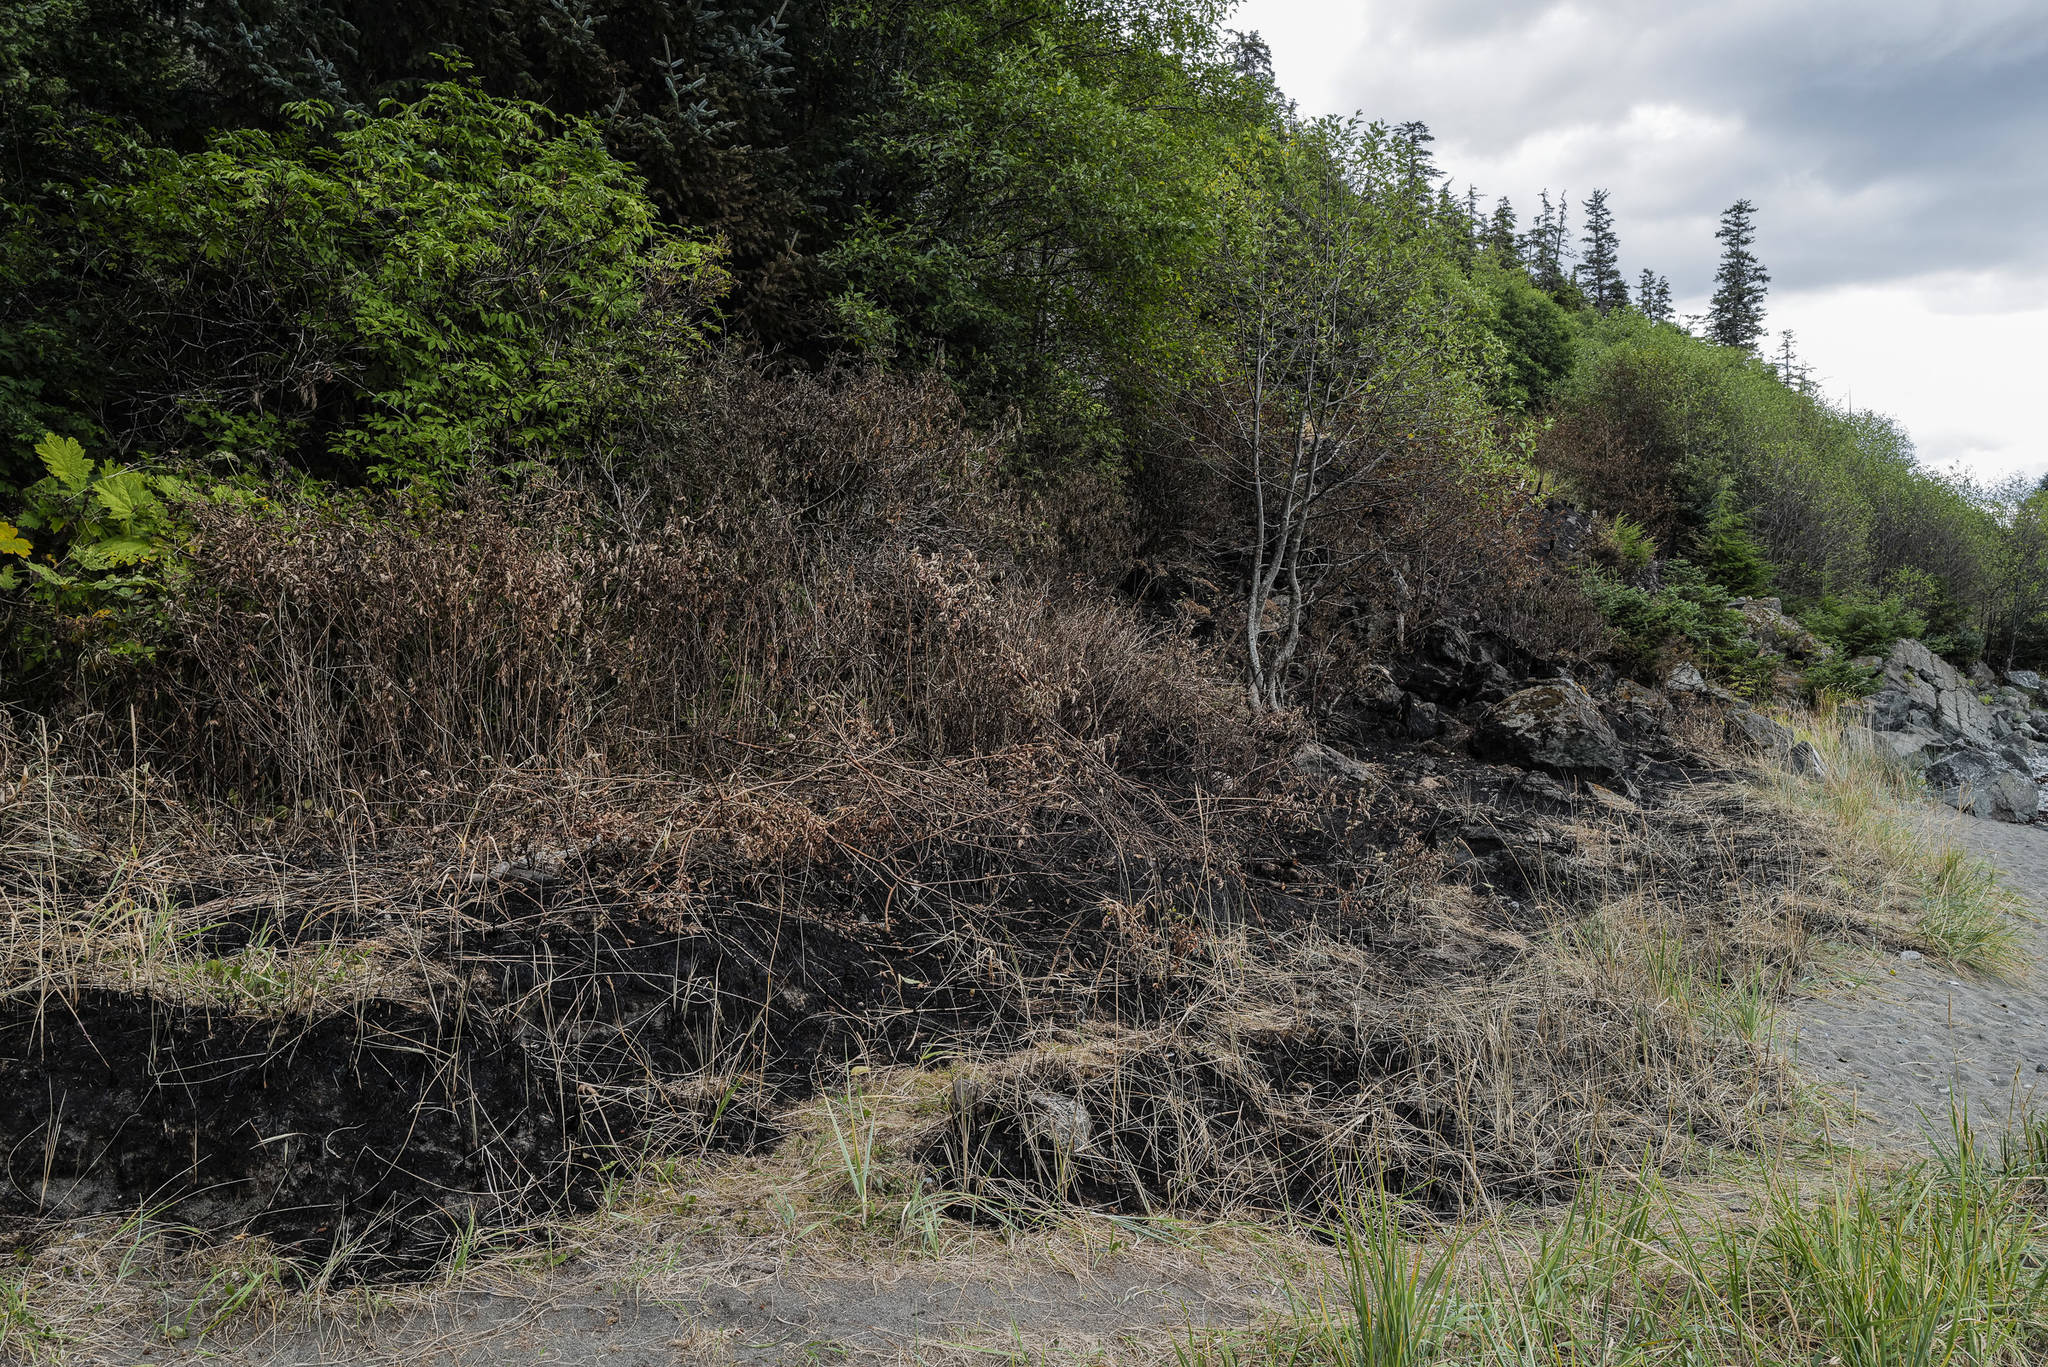 Recent wildfire response slowed by miscommunication